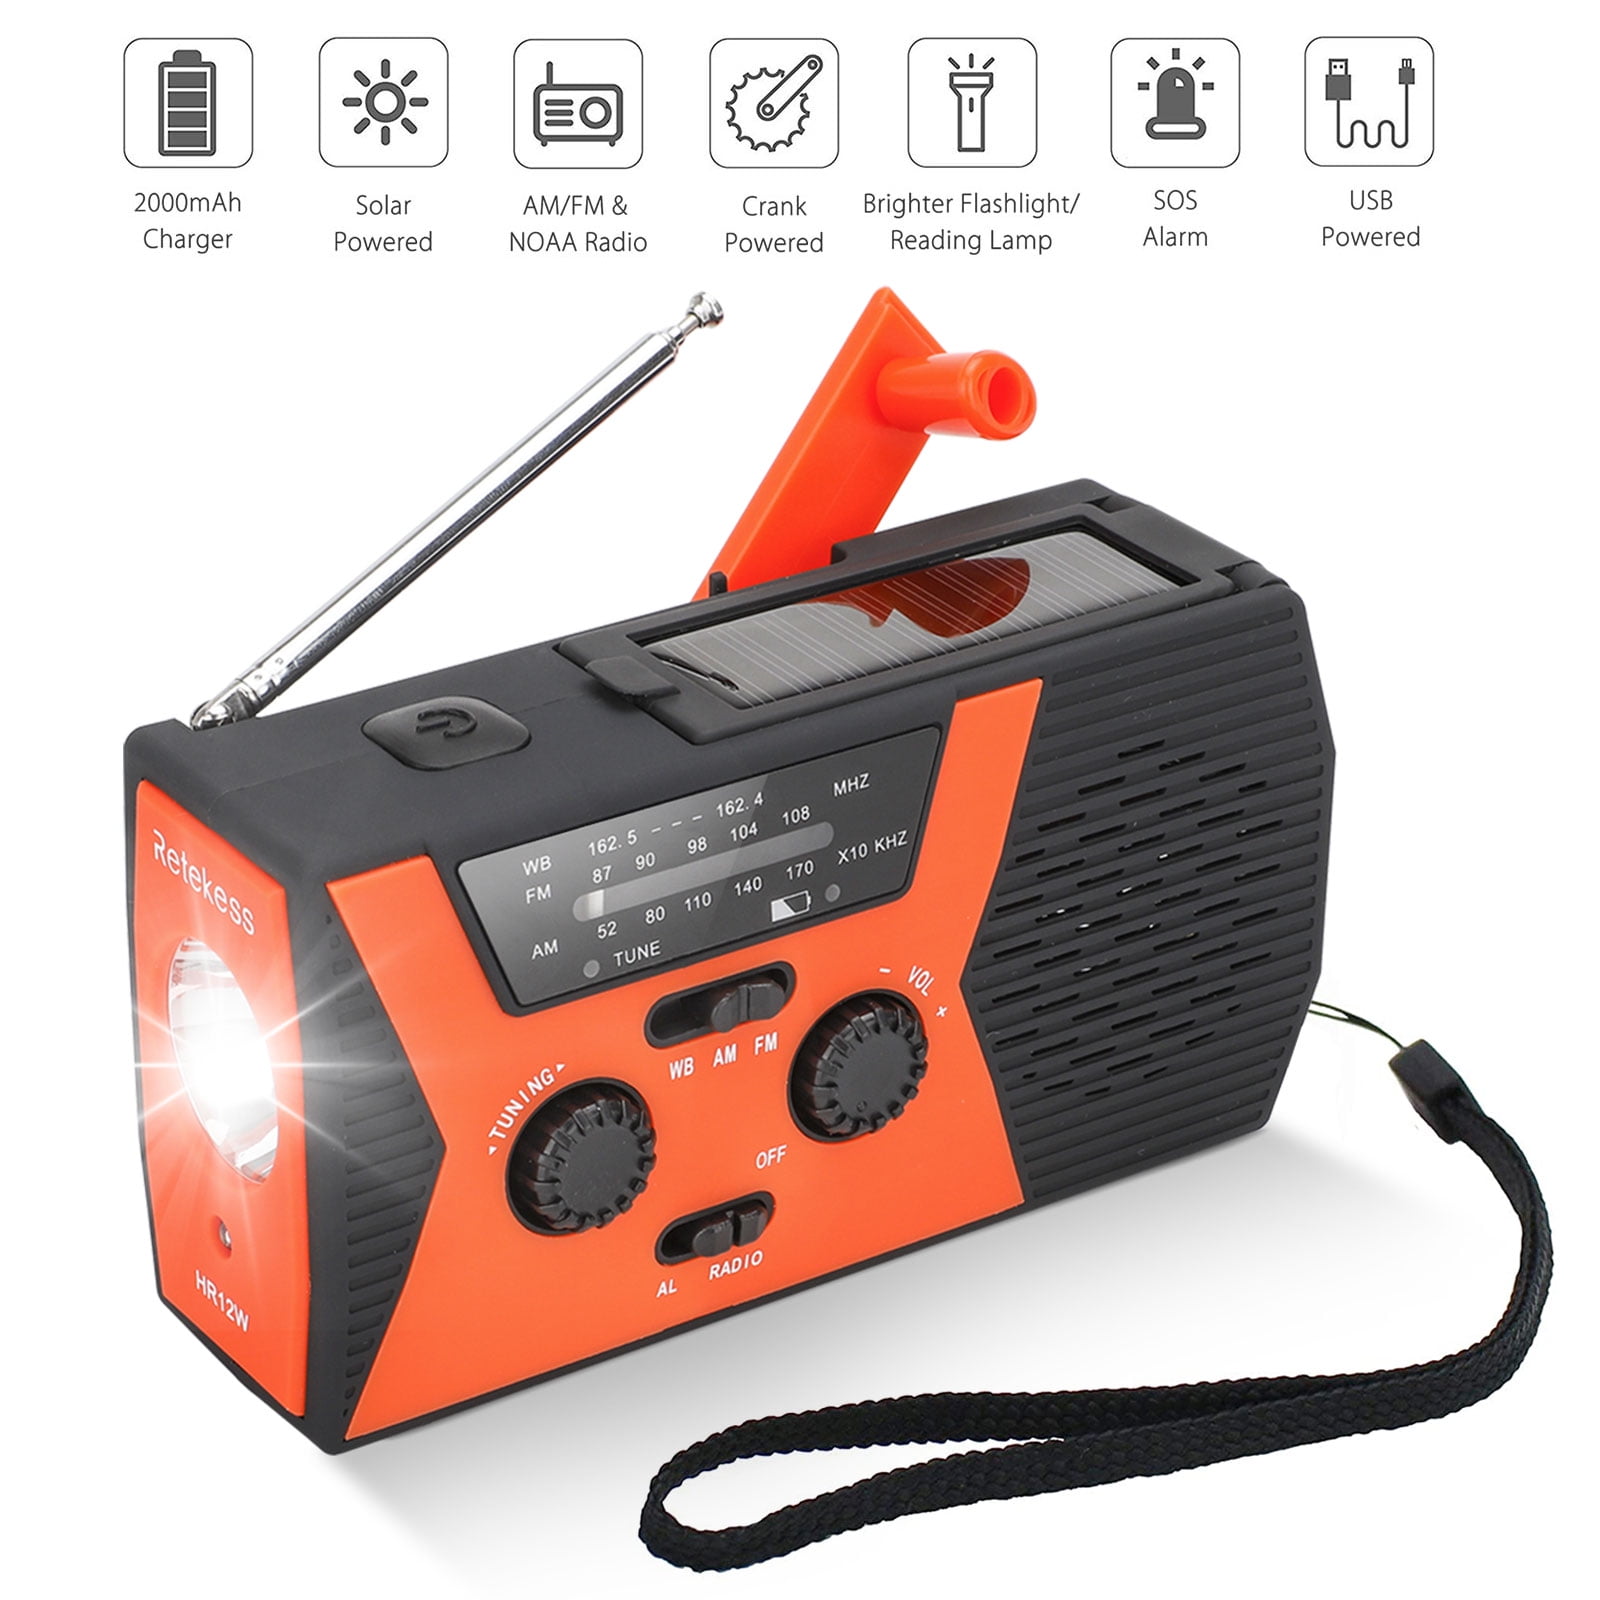 Emergency NOAA Weather Crank Solar Powered Portable Radio with 2000mAh Battery Power for Cell Phone Bright Flashlight and SOS Alarm for Household Emergency and Outdoor Survival